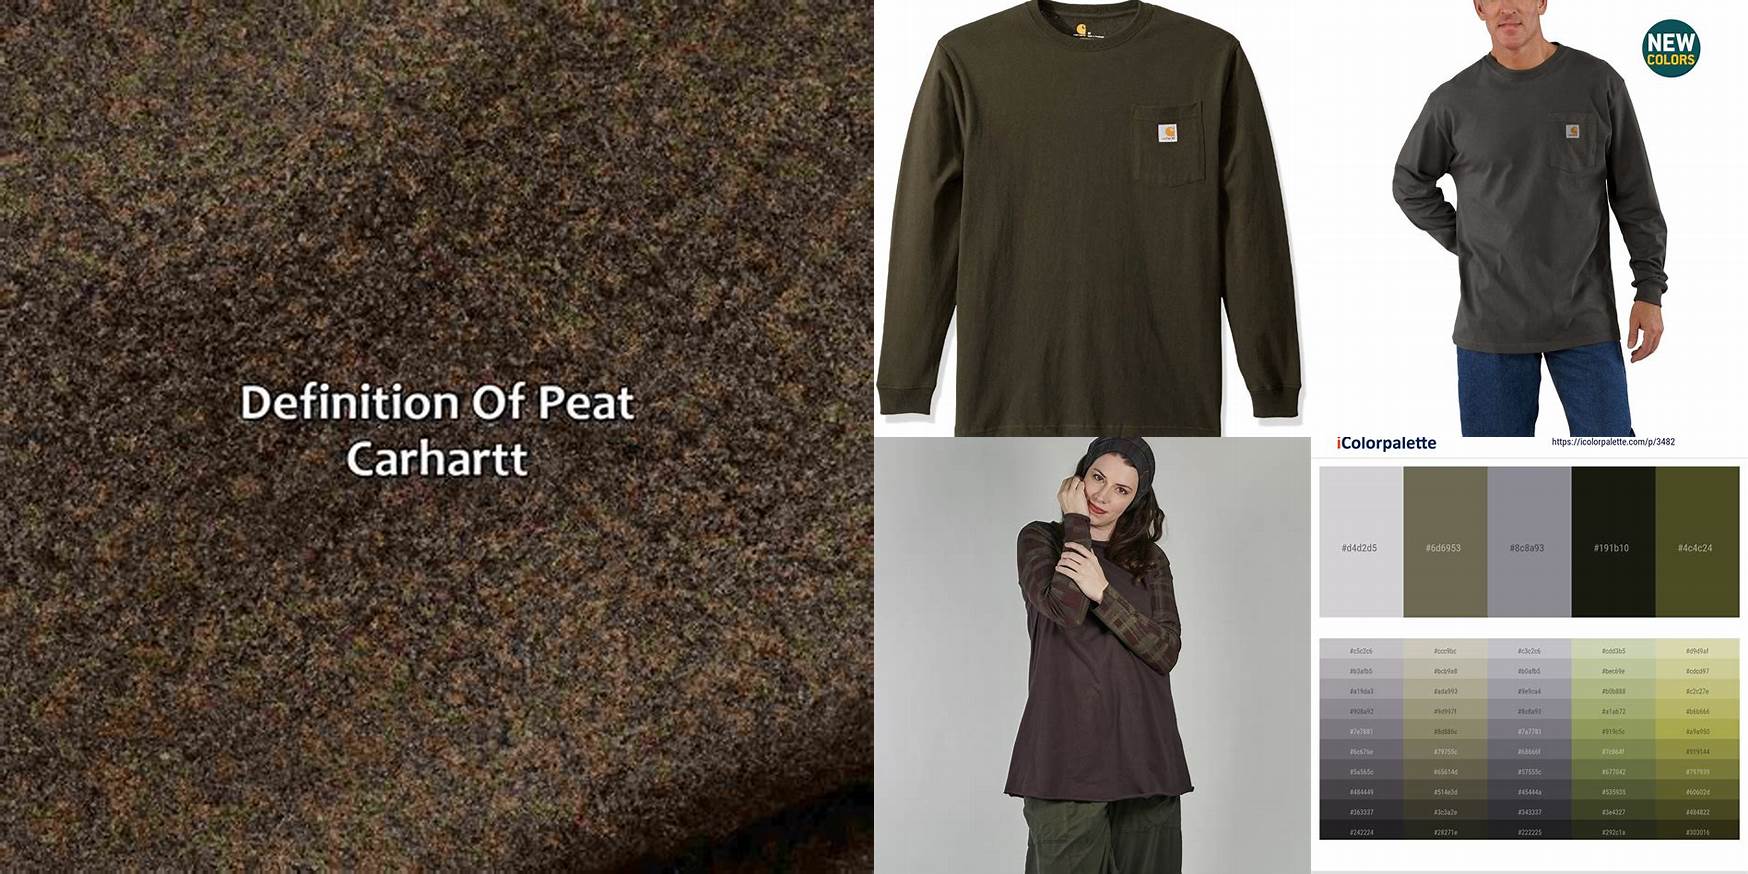 What Color Is Peat In Clothing